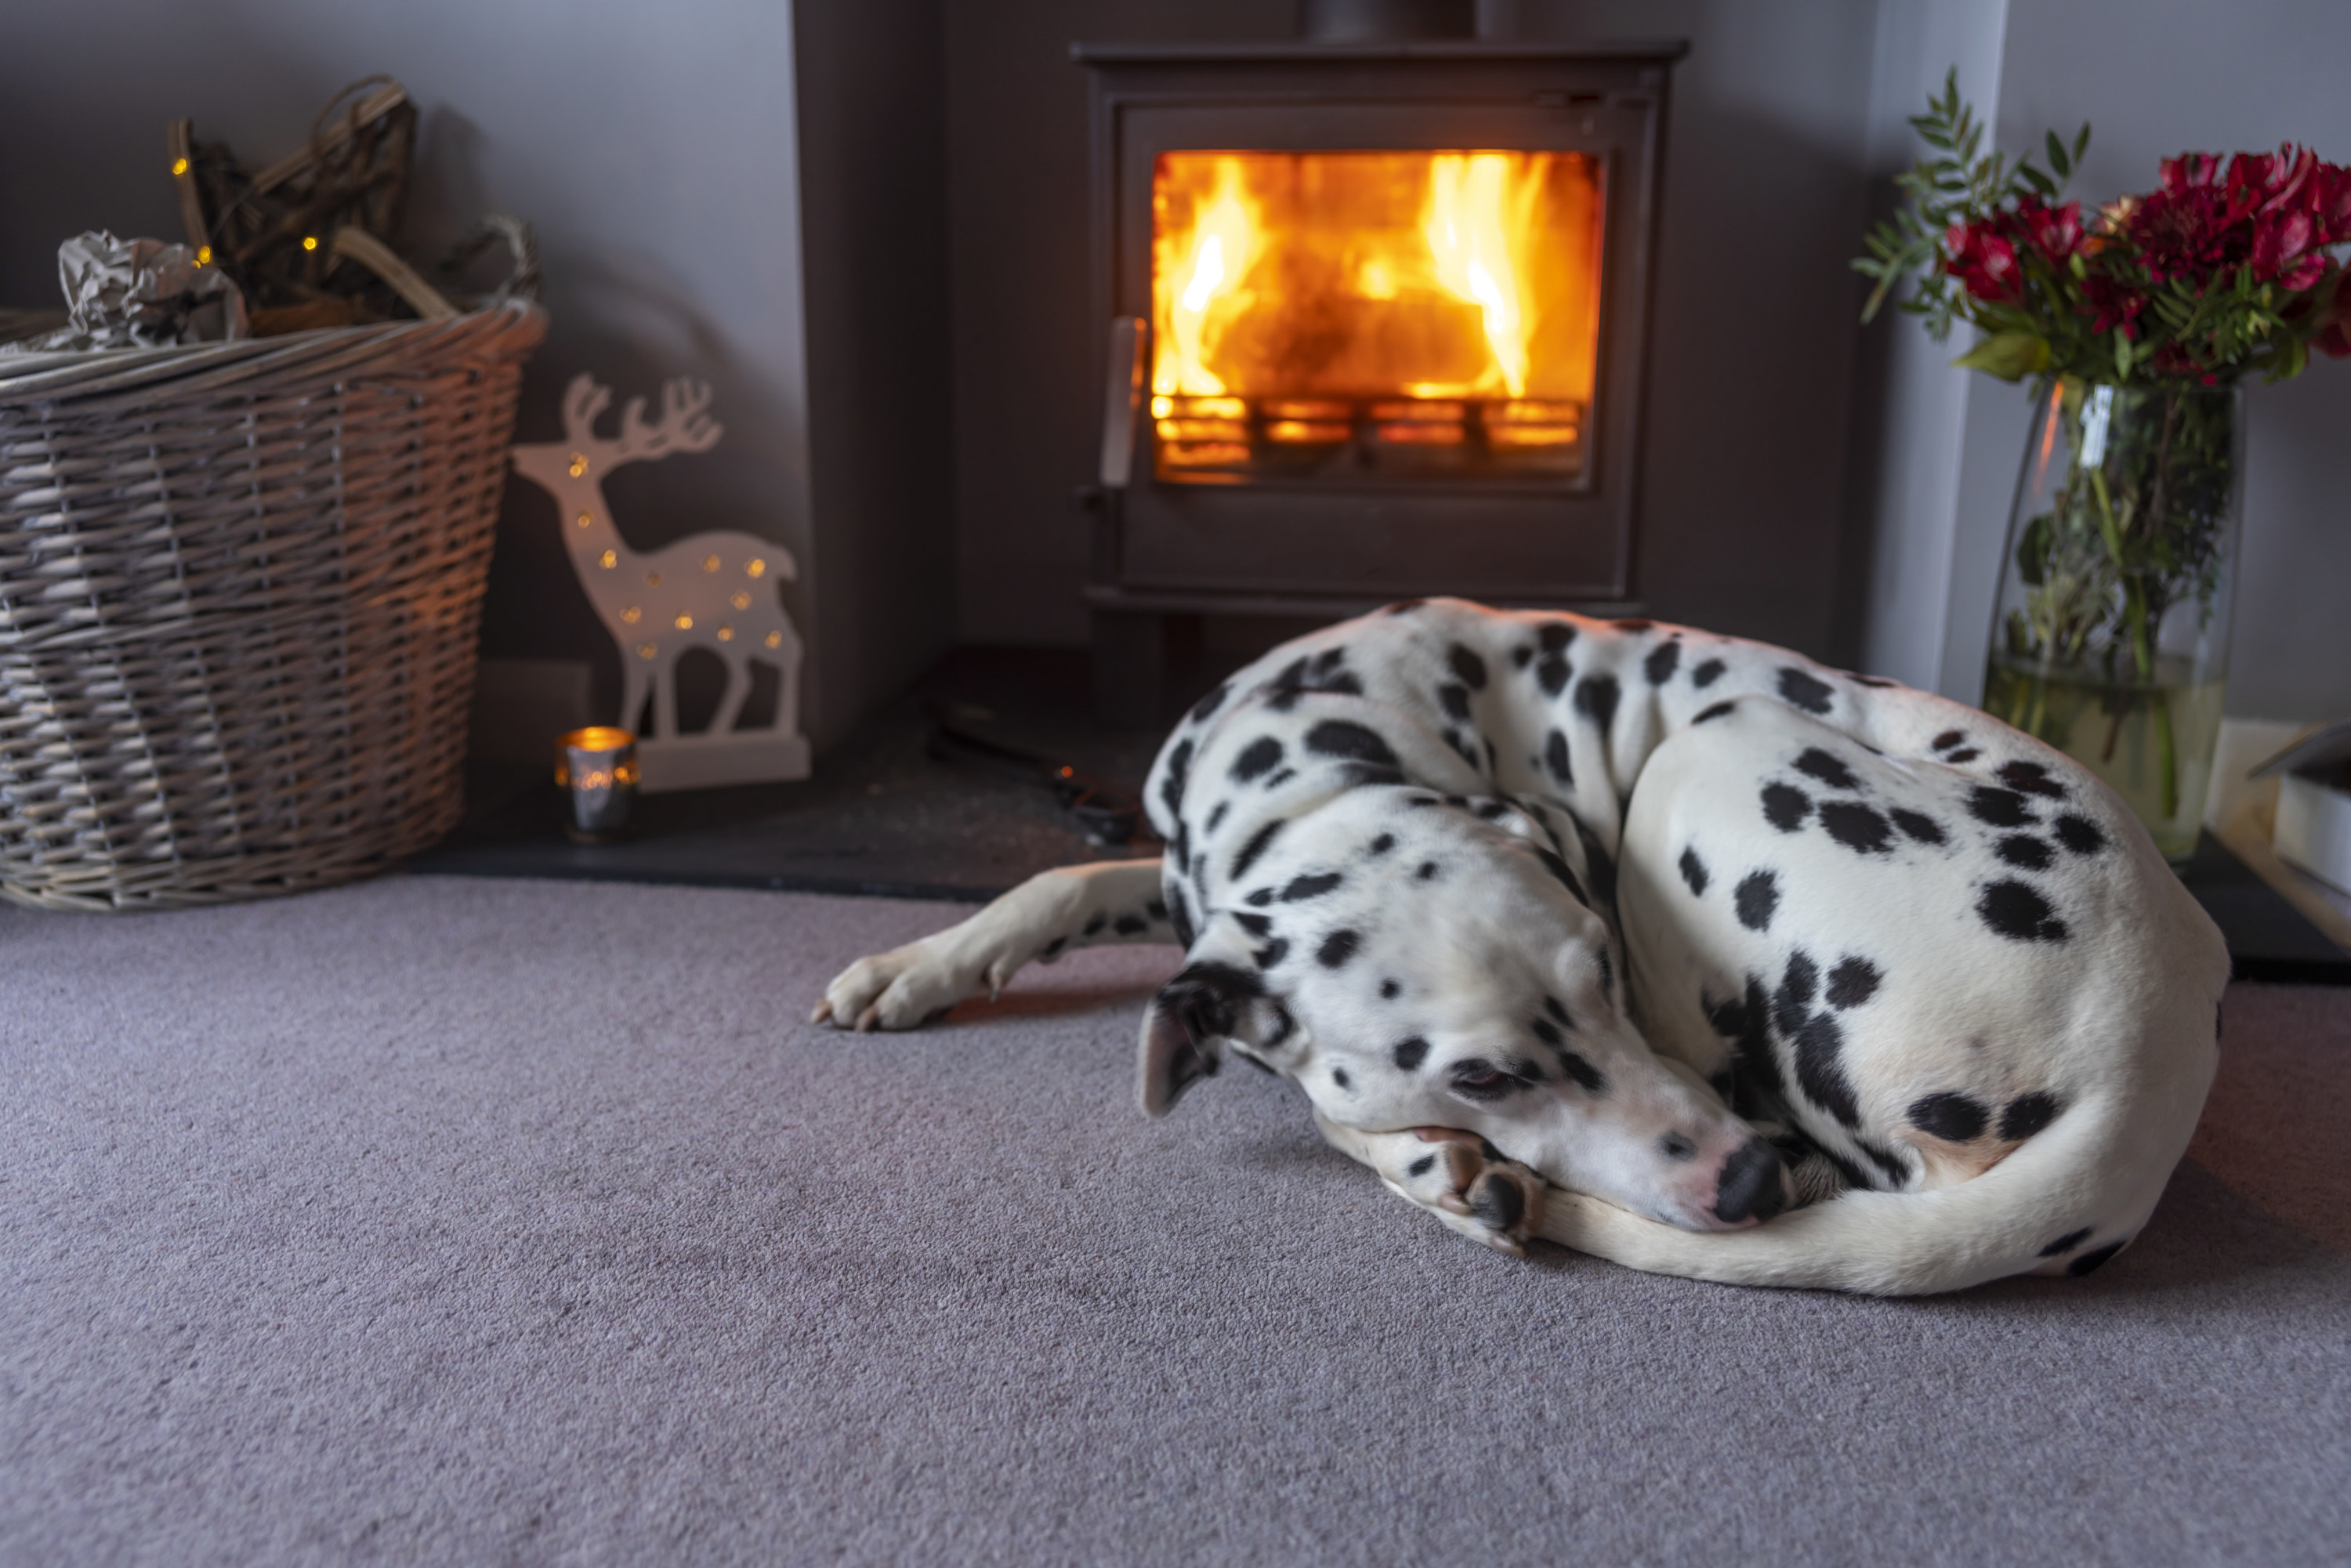 A dog curled up in front of a fire